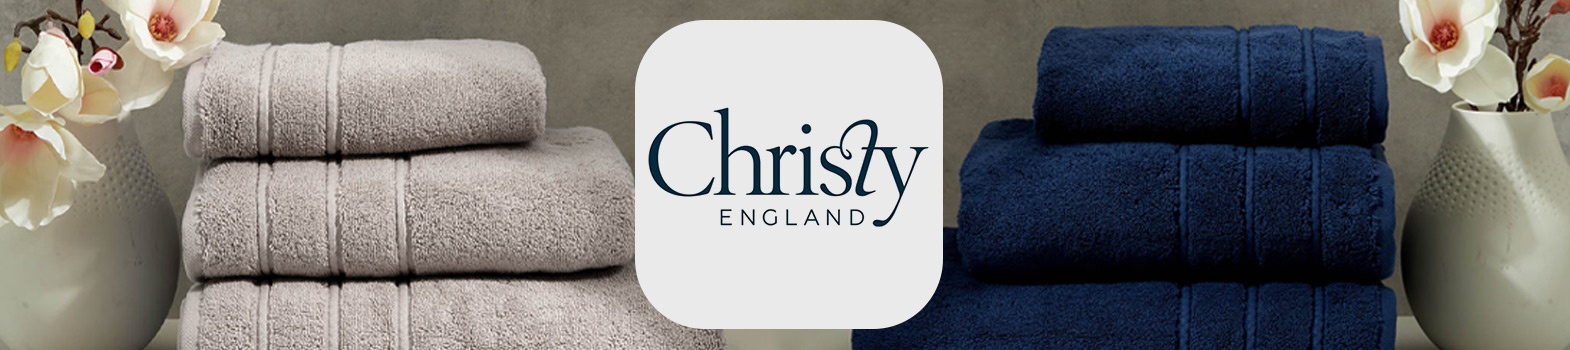 Christy Towels